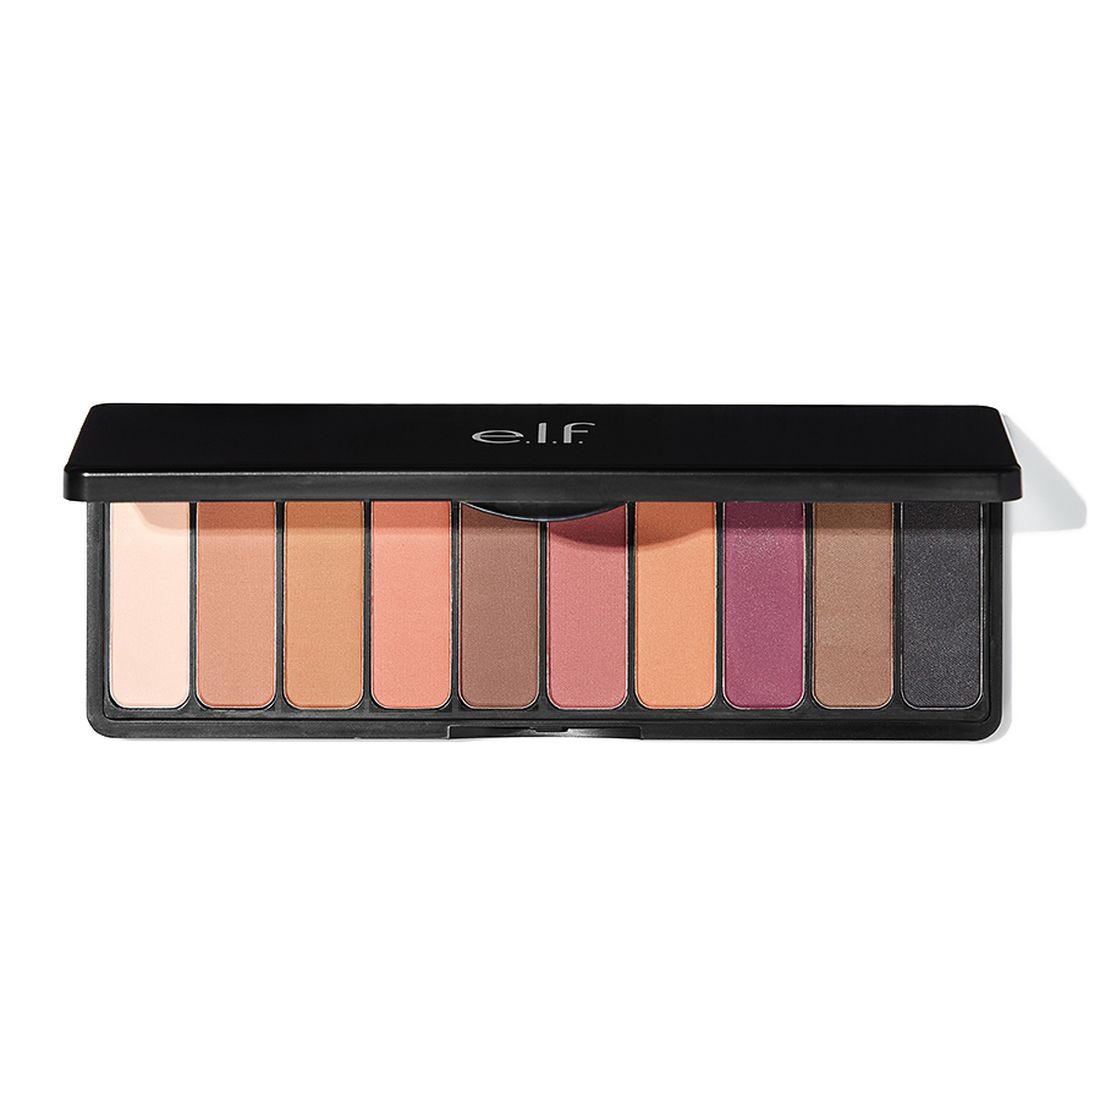 e.l.f mad for matte red eyeshadow palette summer breeze